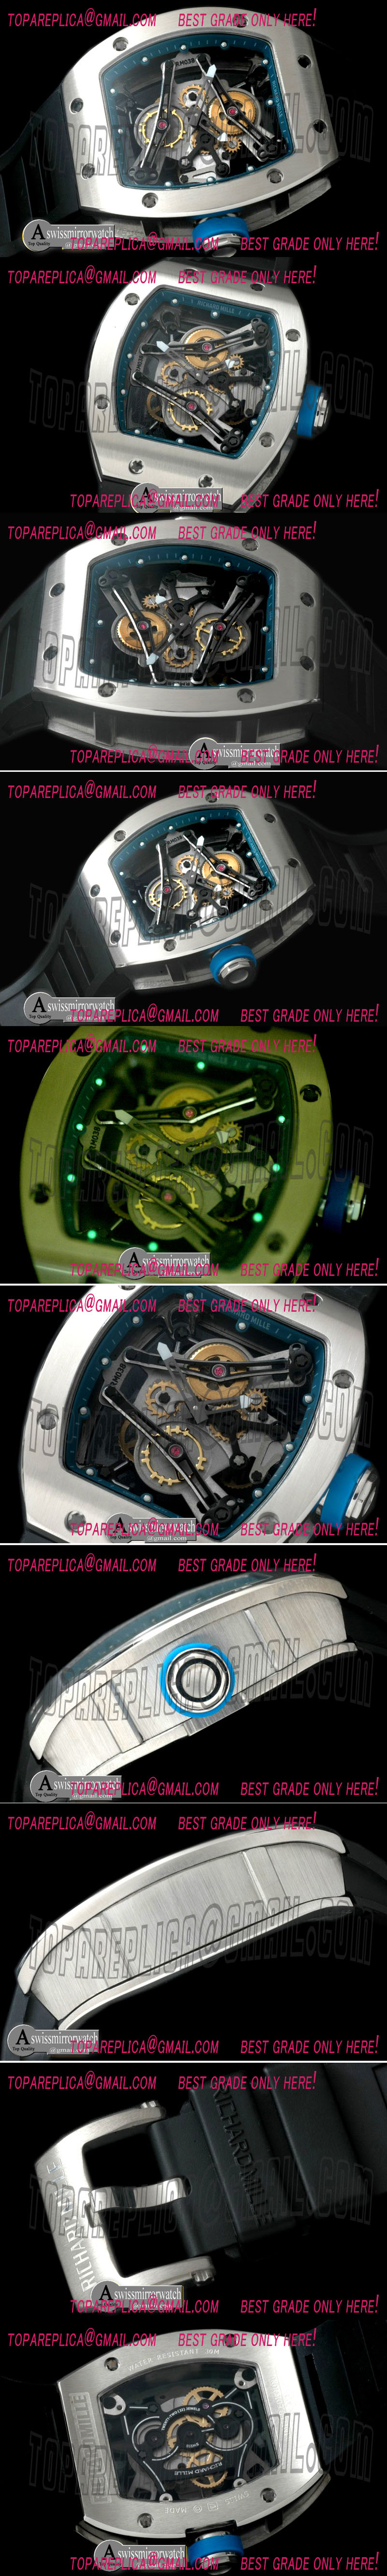 Replica Richard Mille Watches